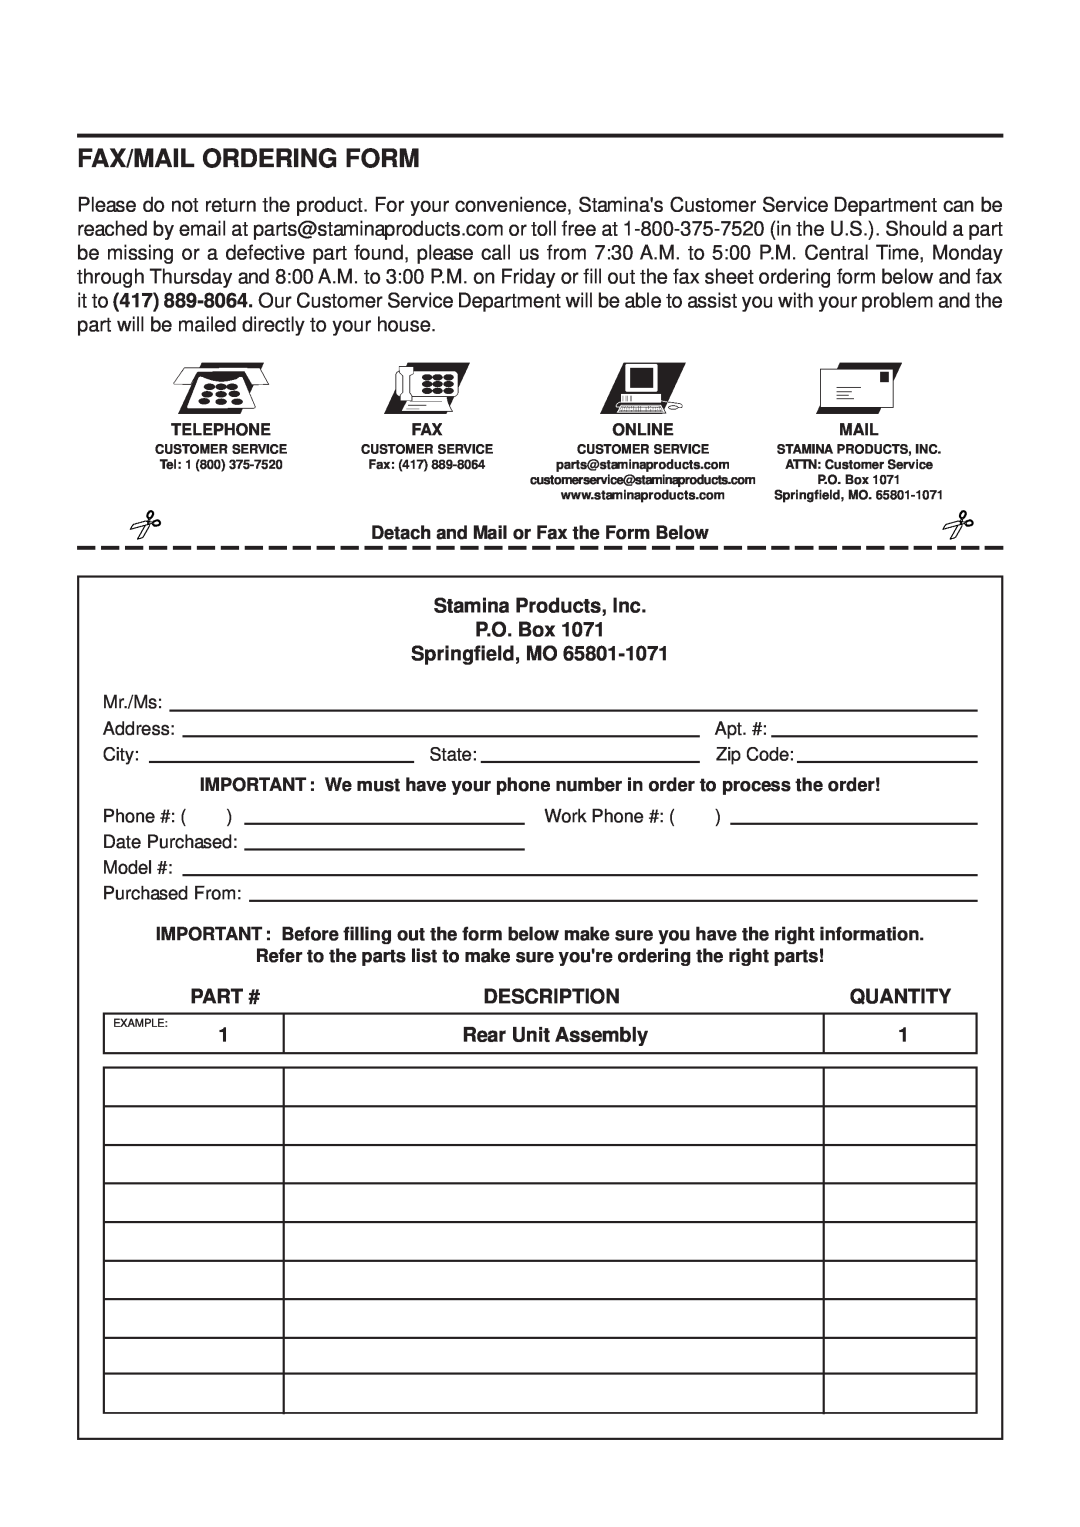 Stamina Products 55-1539A owner manual Fax/Mail Ordering Form, Stamina Products, Inc P.O. Box Springfield, MO, Description 